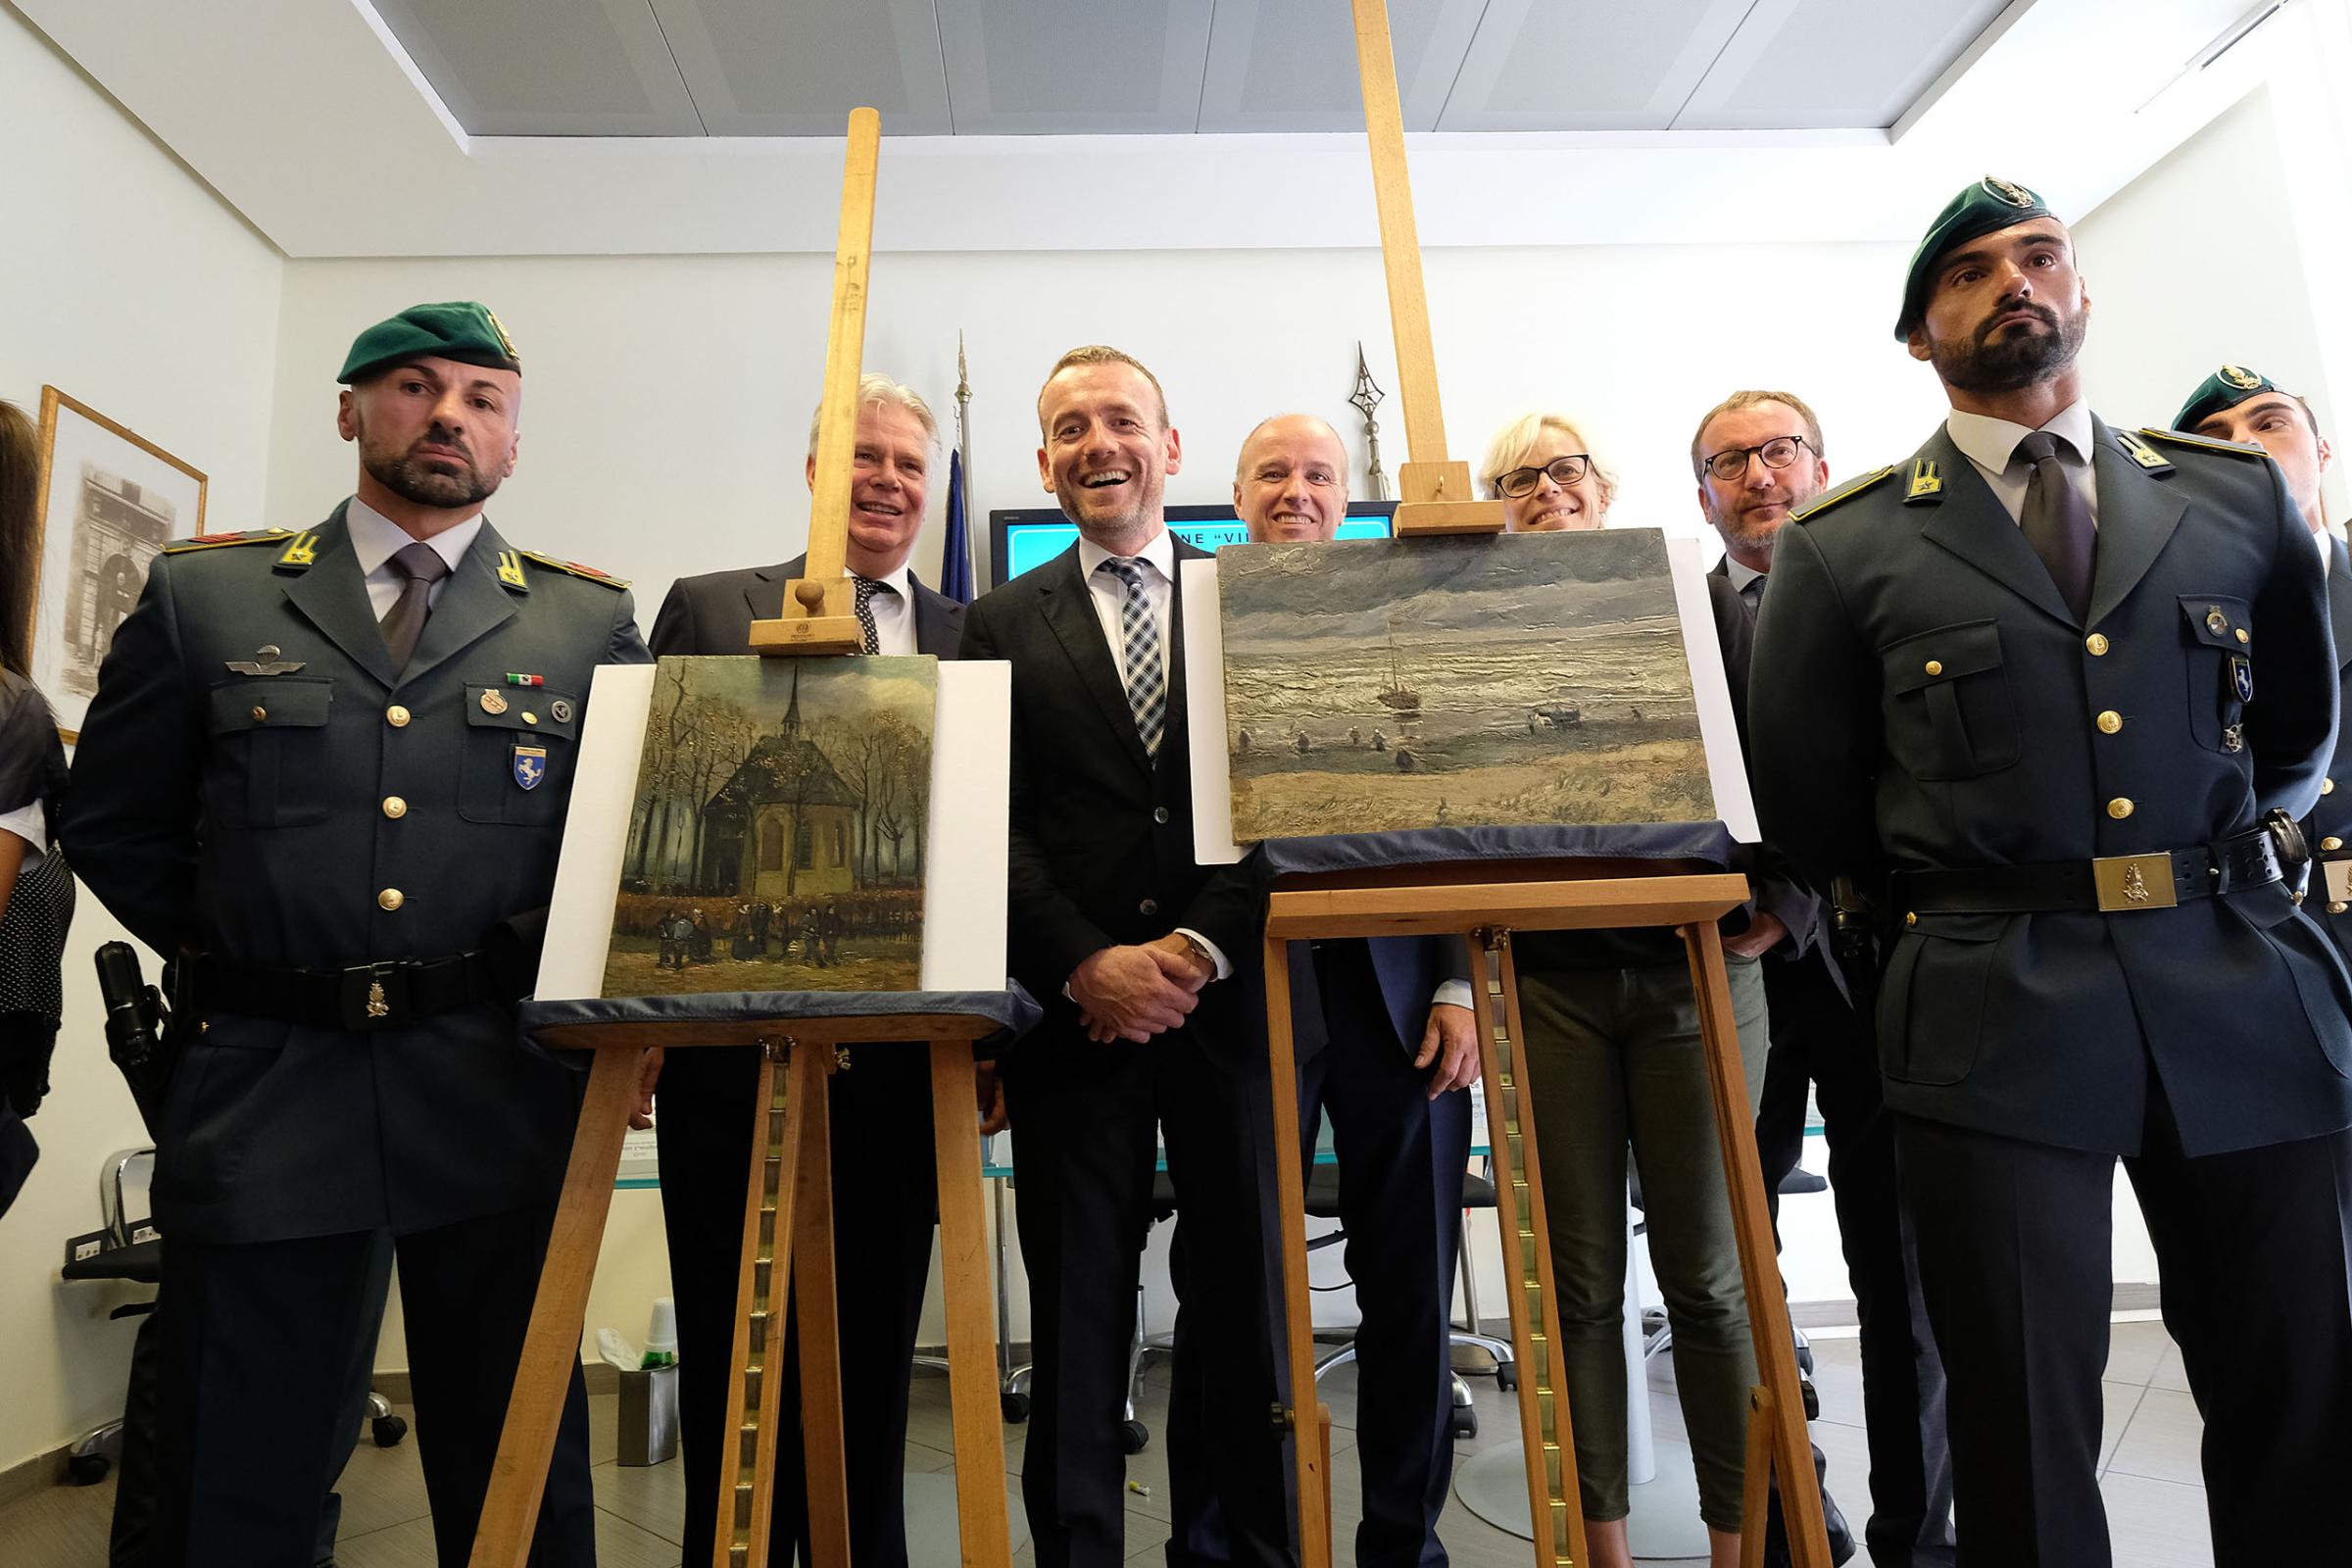 Axel Ruger, Director of the Van Gogh museum, poses next to "Congregation Leaving the Reformed Church in Nuenen" (L) and "The Beach At Scheveningen During A Storm" (R) by Vincent van Gogh. The two Van Gogh paintings were stolen in Amsterdam 14 years ago and recently recovered by organized crime investigators in Italy, on Sept. 30, 2016.